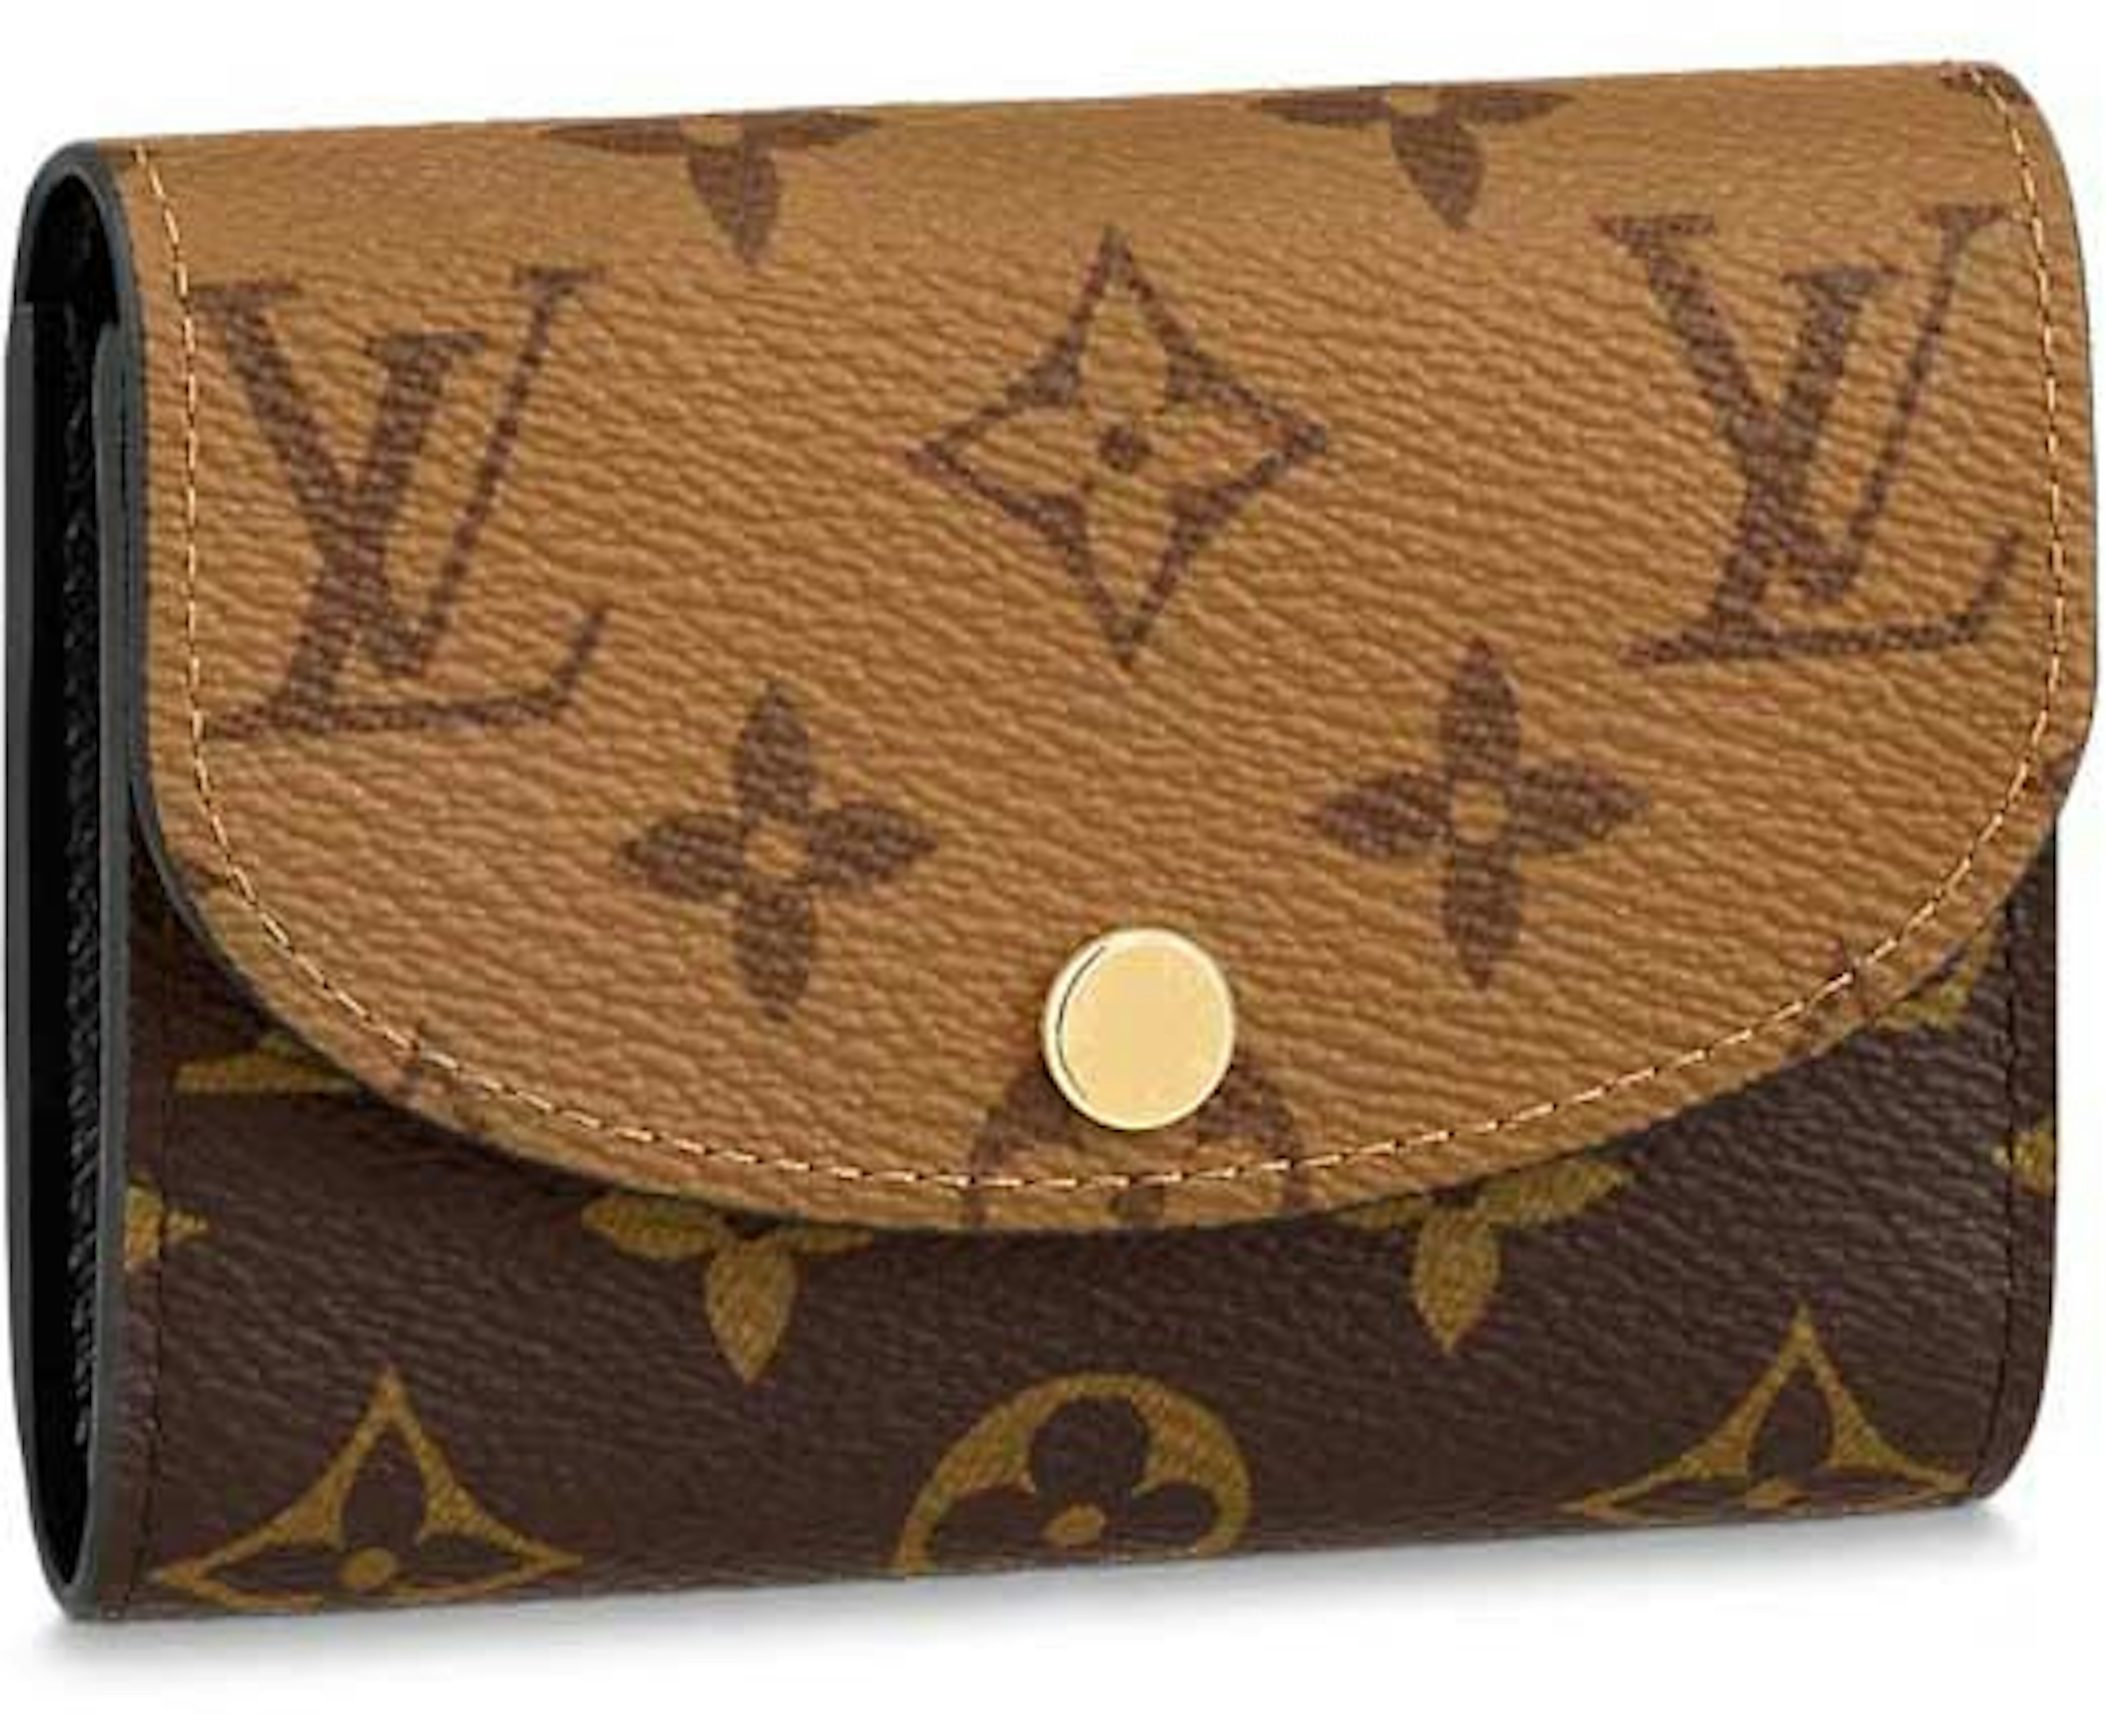 Rosalie Coin Purse Monogram Reverse Canvas - Wallets and Small Leather  Goods M82333